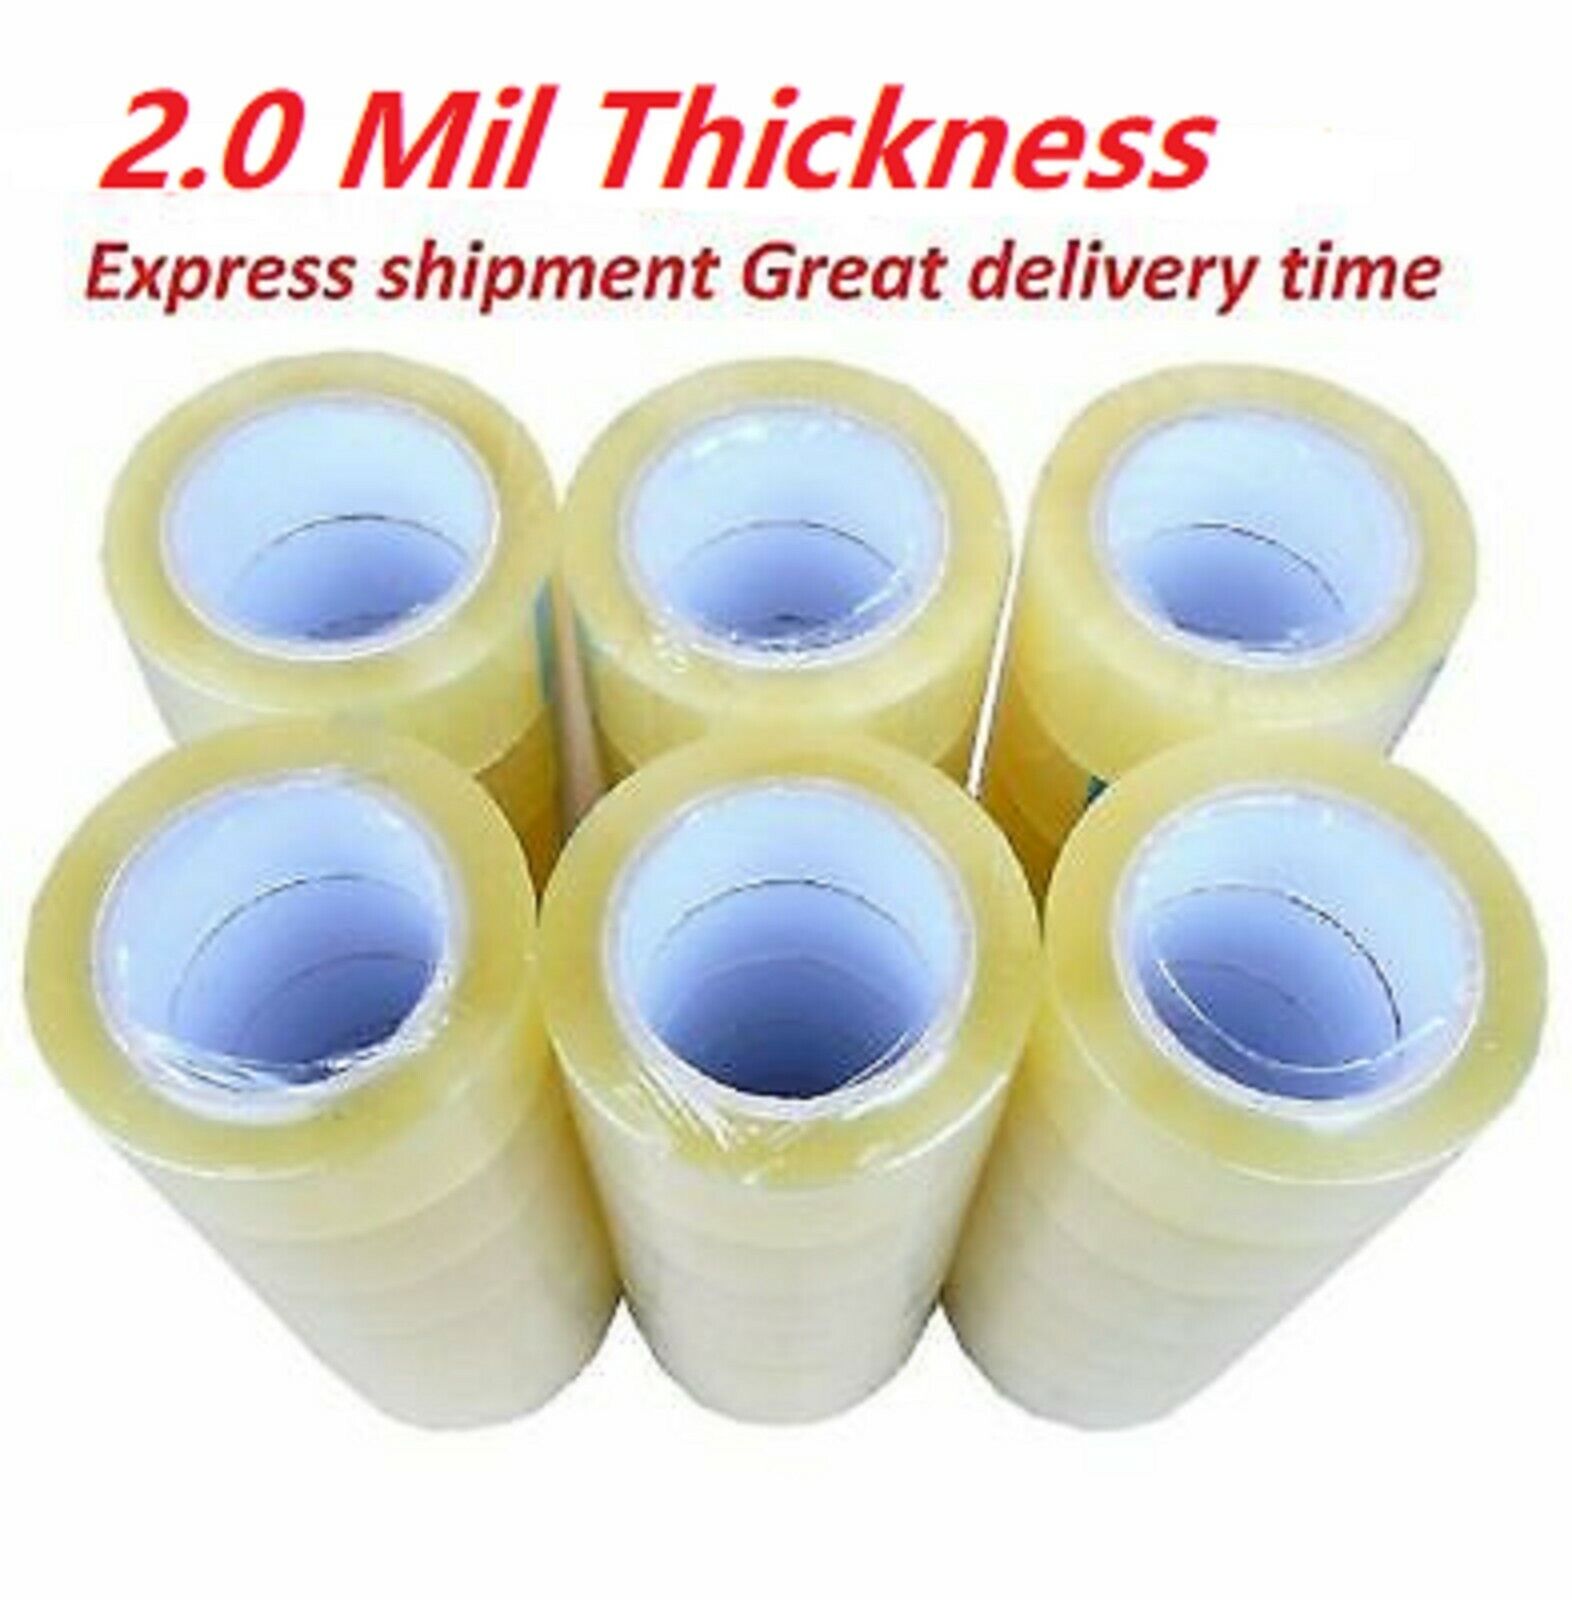 36 Rolls Clear Packing Packaging Carton Sealing Tape 2.0 Mil Thick 2x110 Yards Prinko 36 rolls